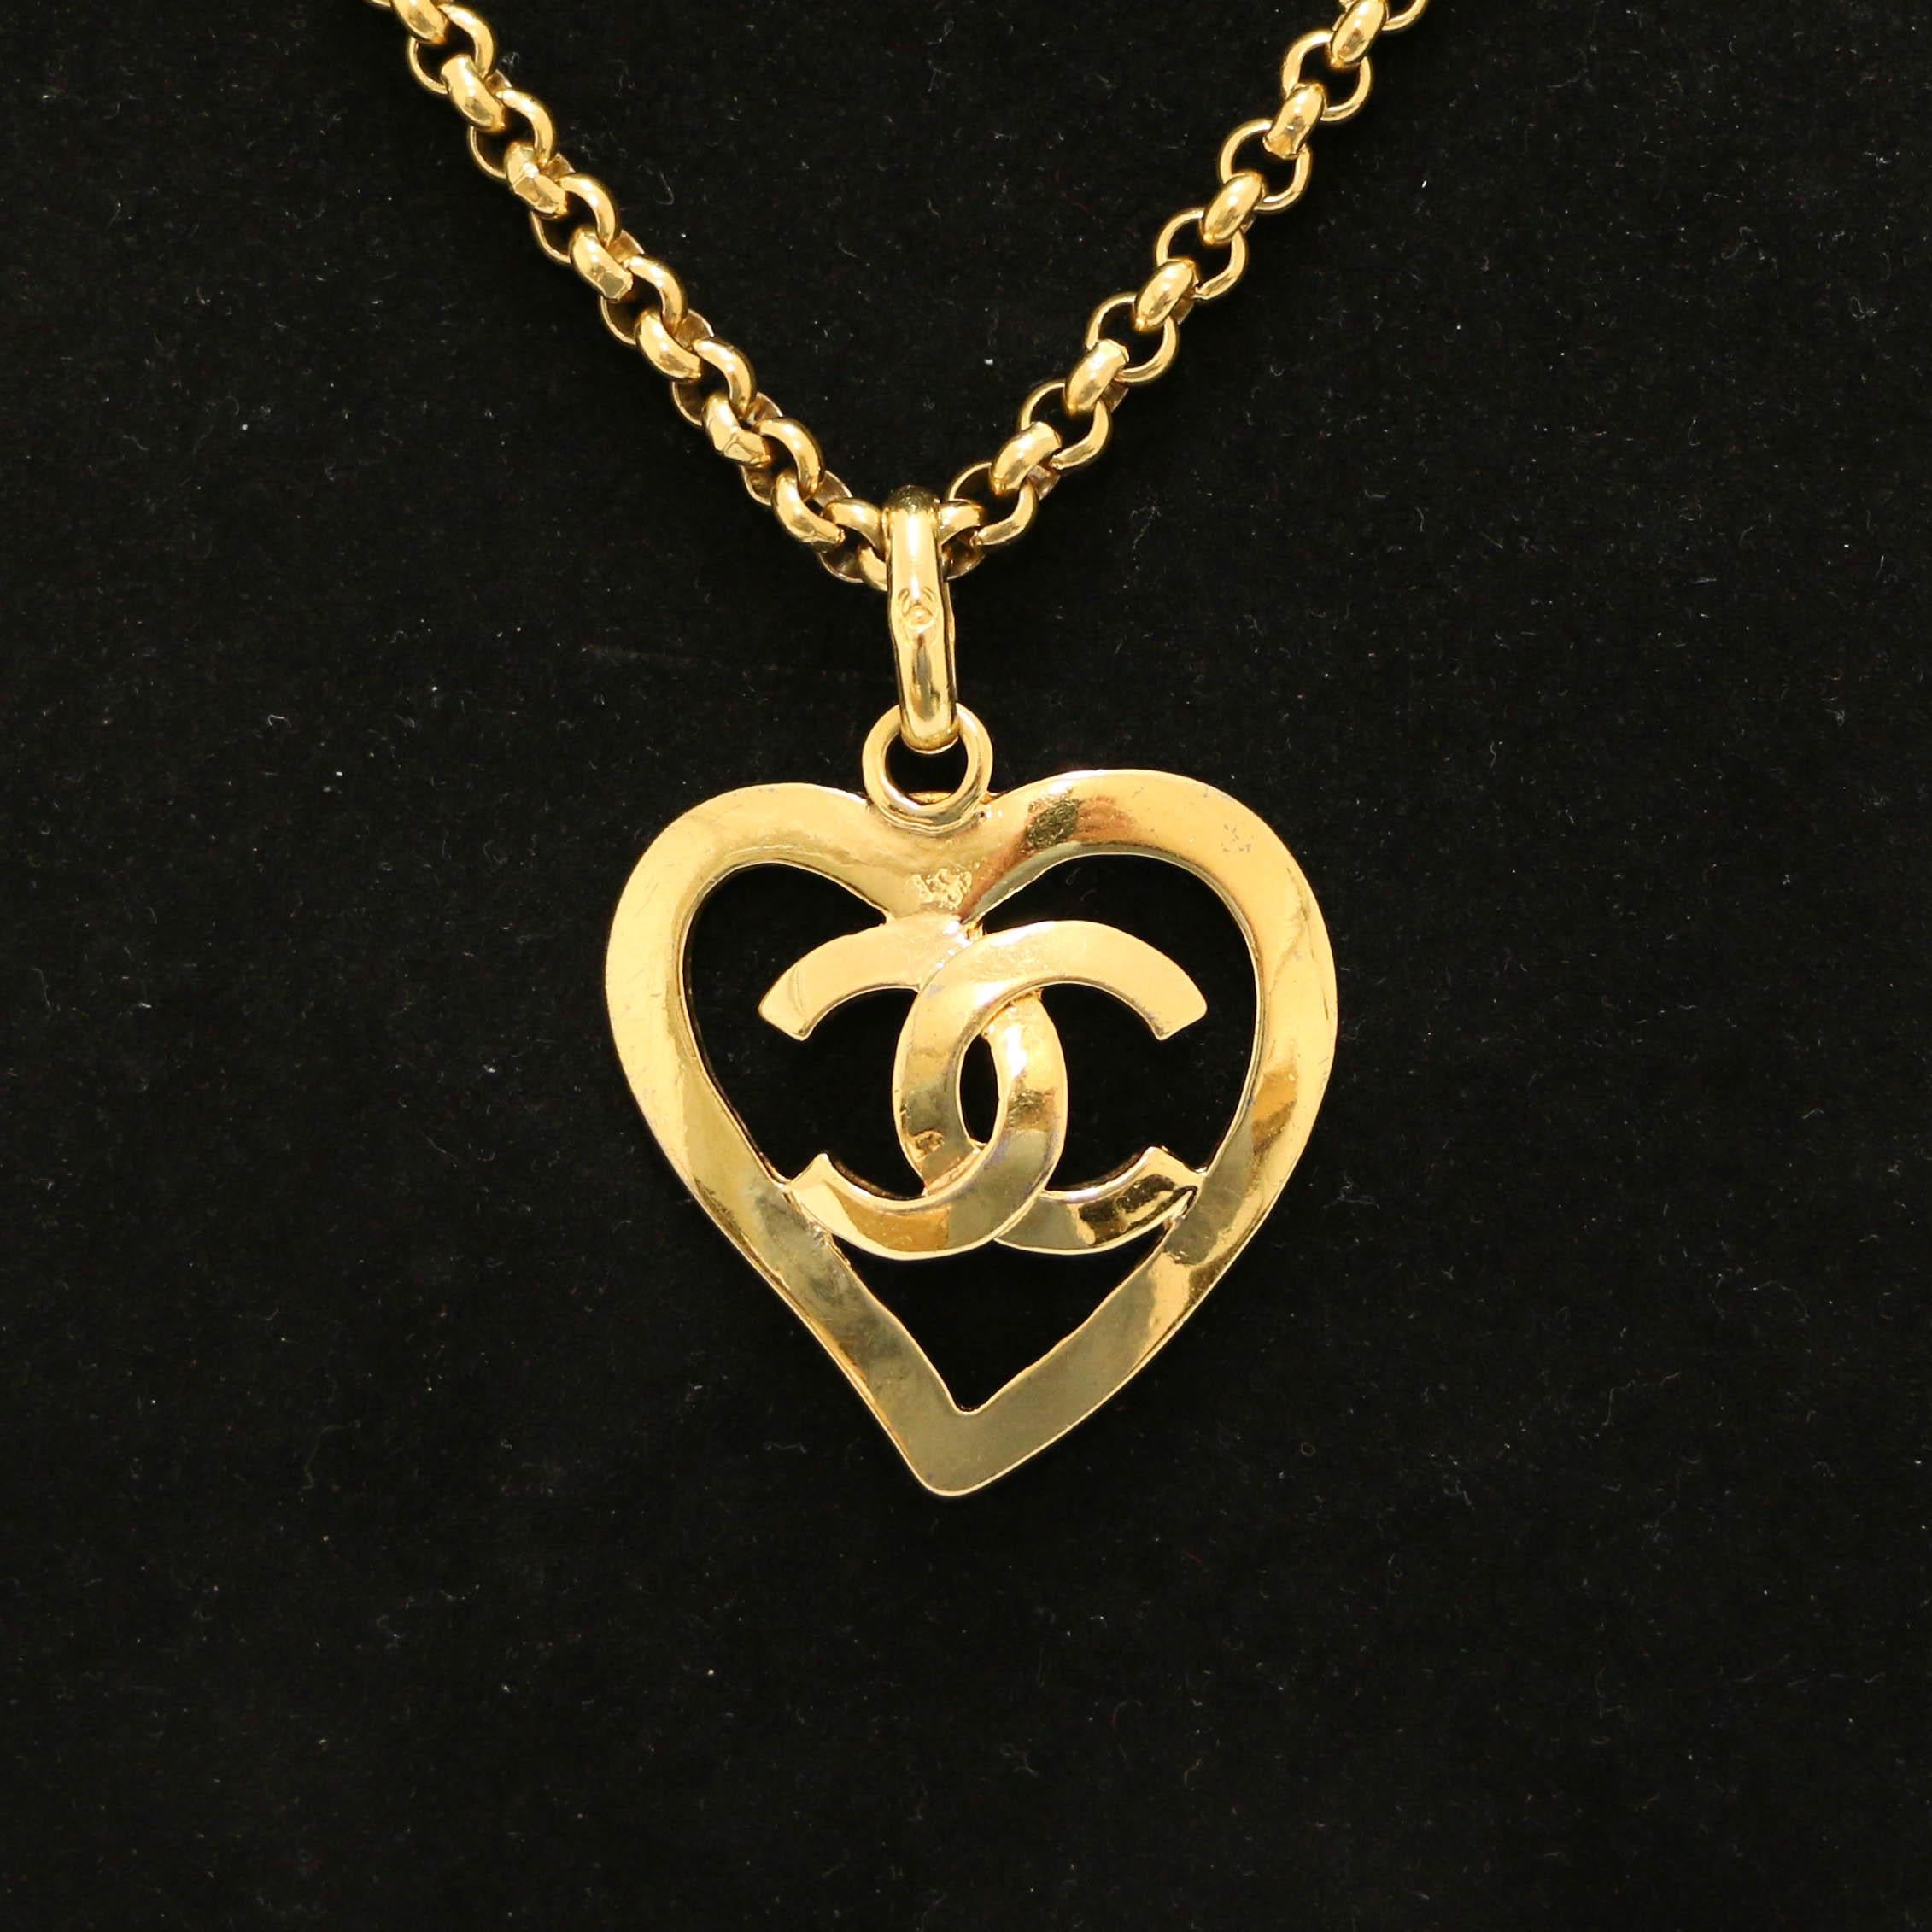 Stunning Chanel golden heart necklace from 1995!

Condition:  very good
Made in France
Materials: metal 
Color: gold
Dimensions: heart: 4x4cm, chain: 60cm
Hardware : golden metal
Year : spring 1995